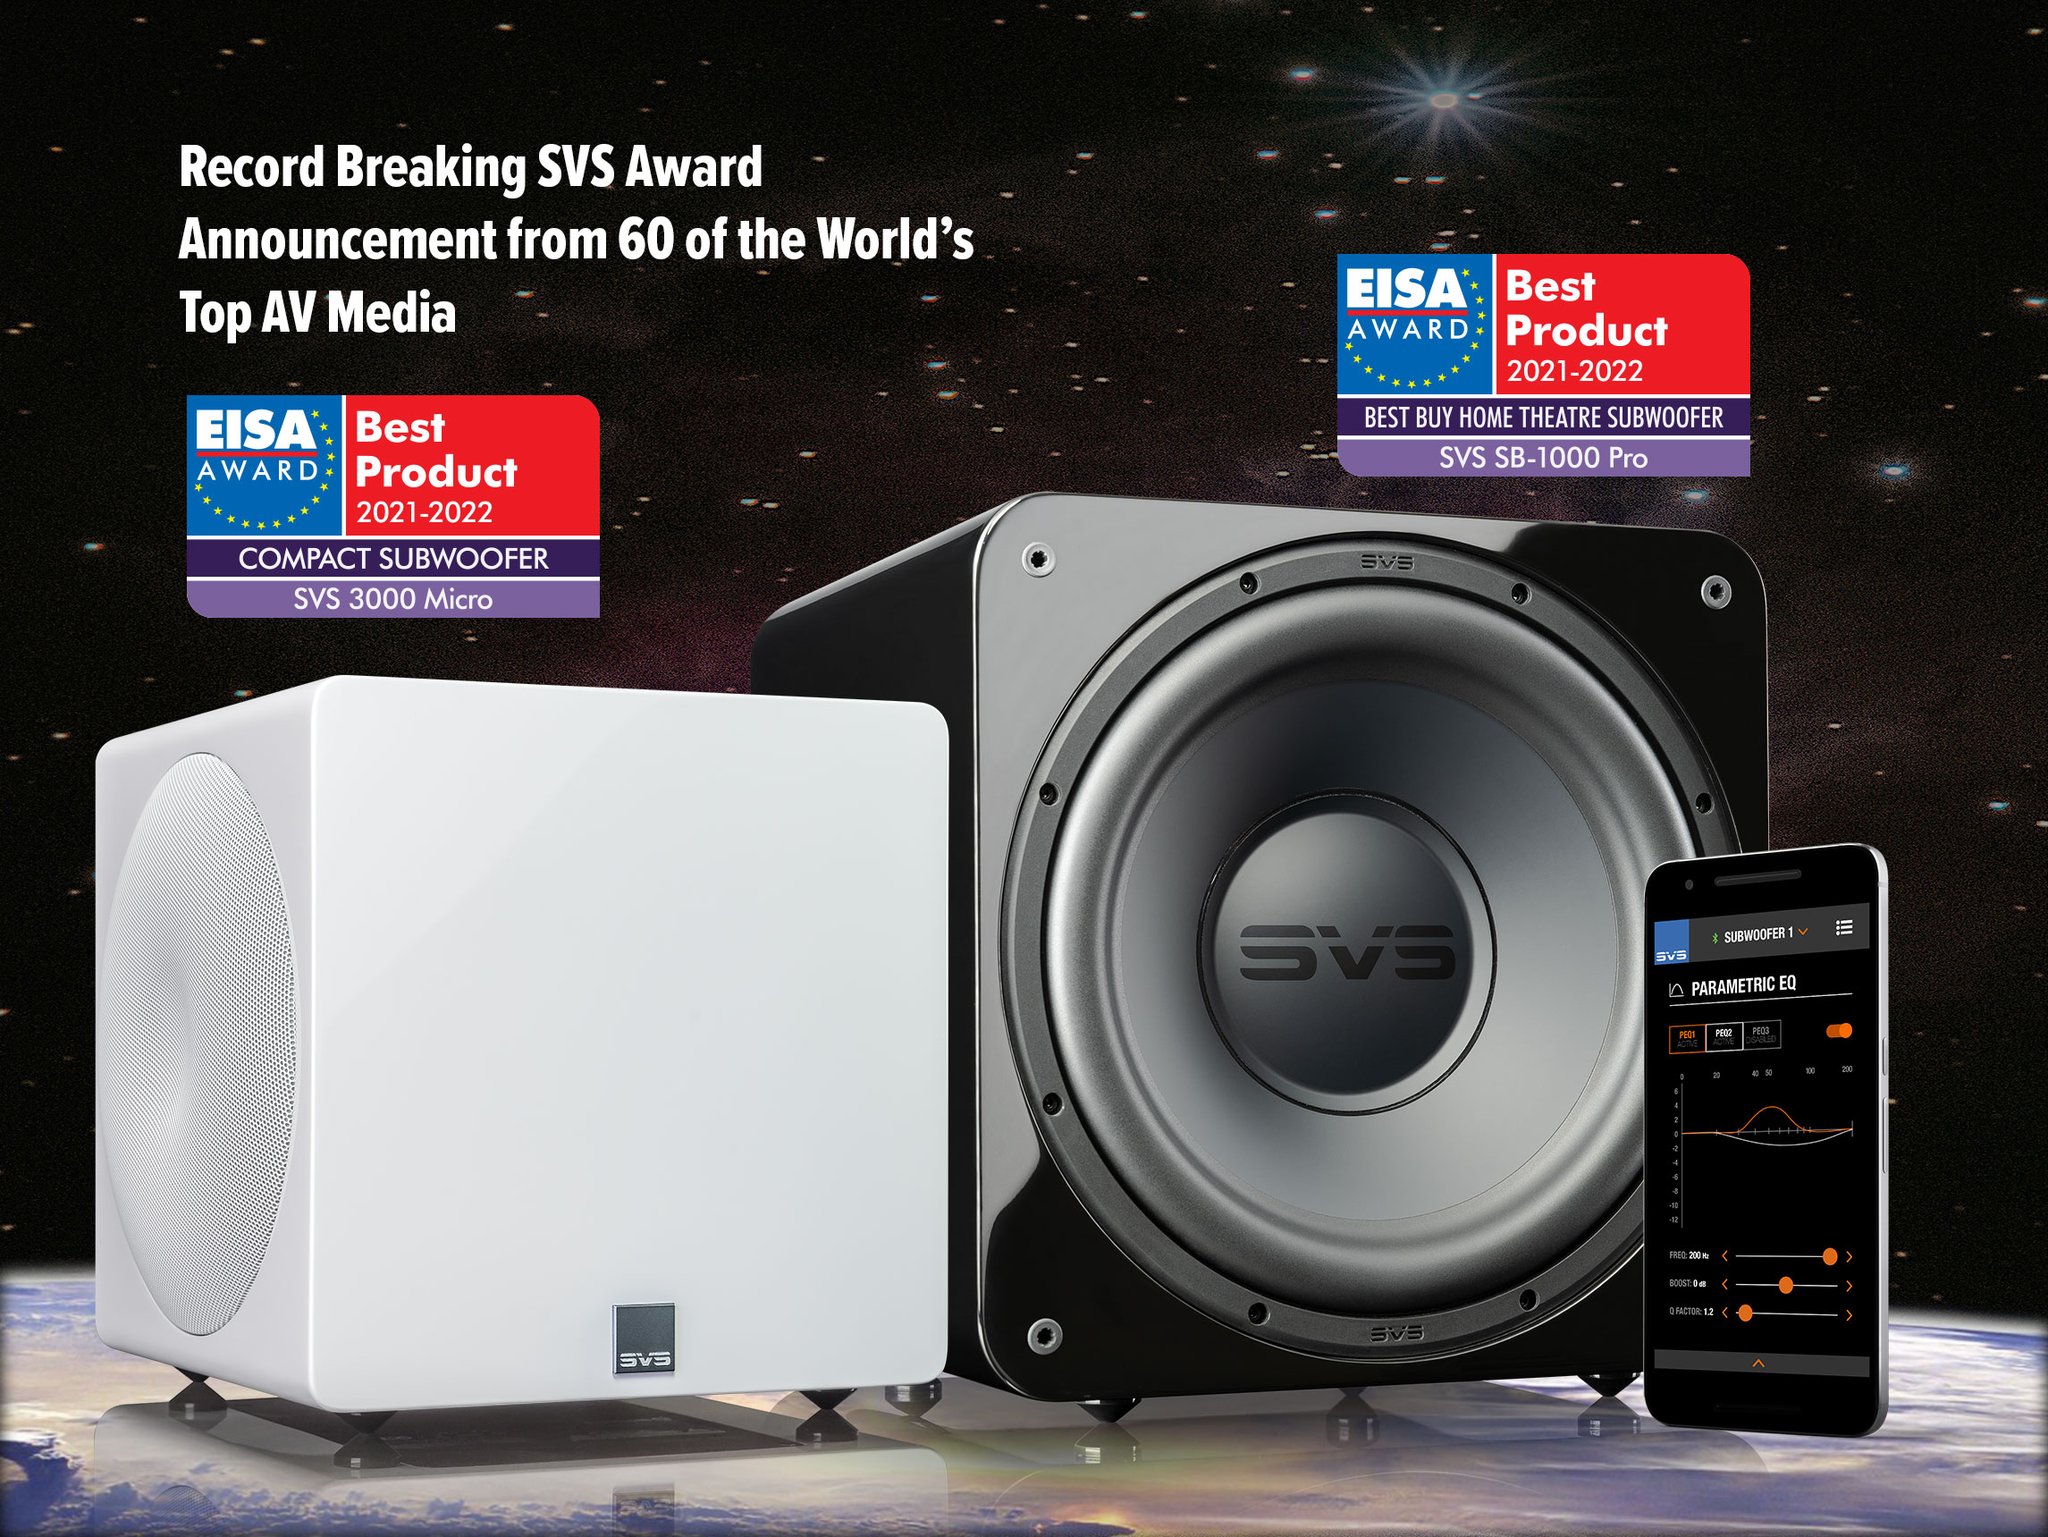 SVS Earns EISA Awards for Best Compact Subwoofer (3000 Micro) and Best Home Theater Subwoofer (SB-1000 Pro)